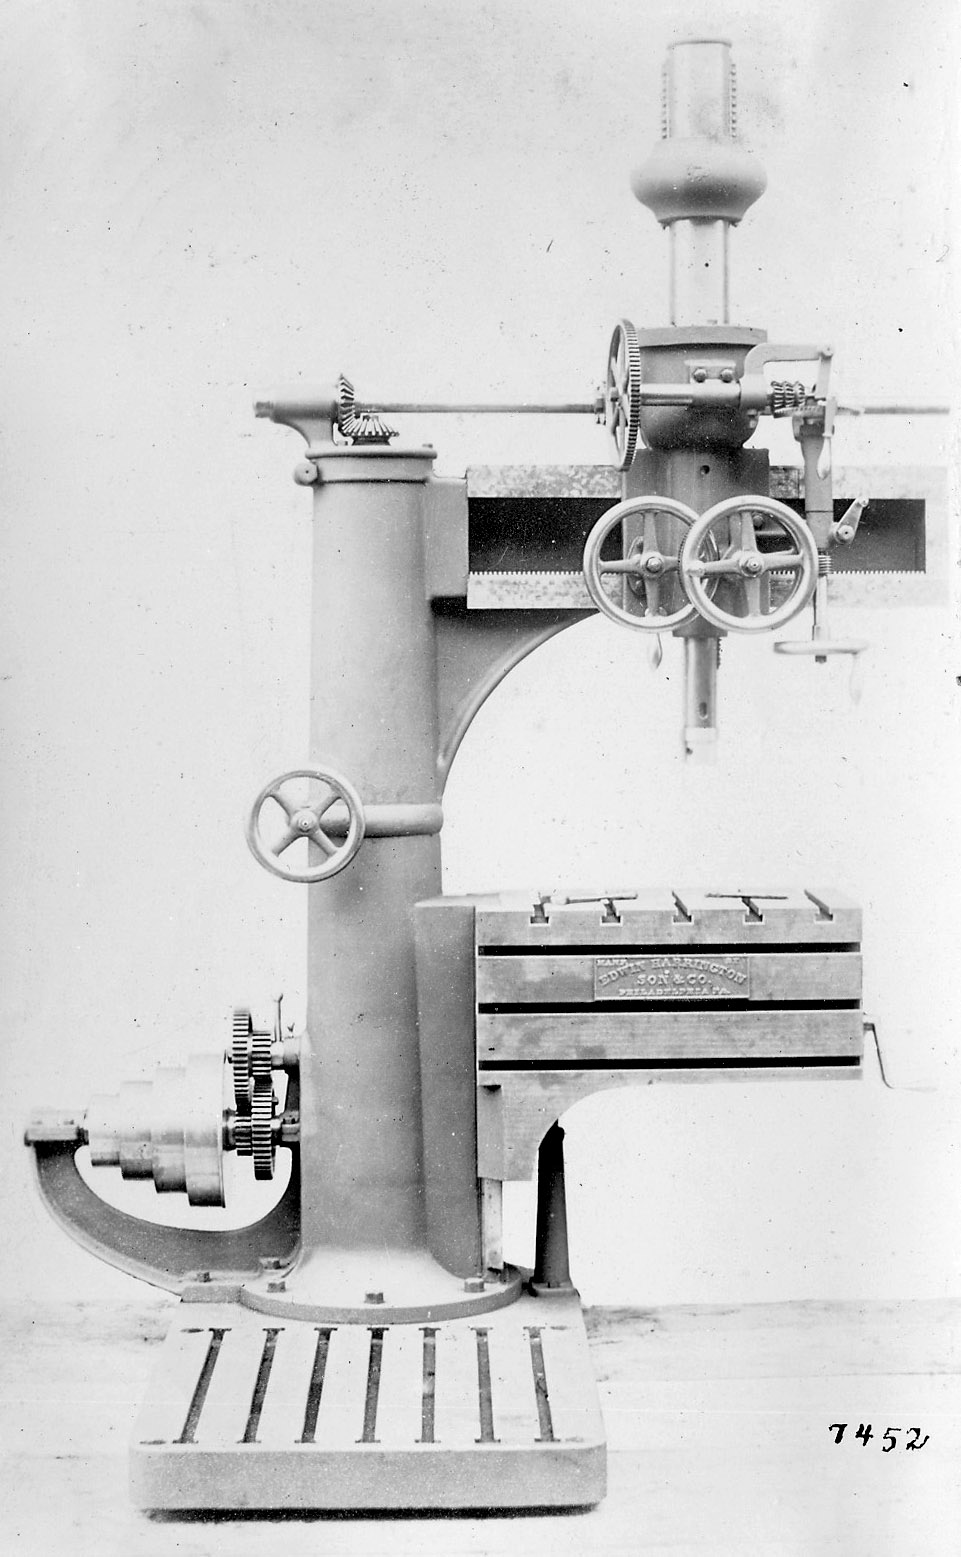 Edwin Harrington -Inch Radial Drill, pages 78-79